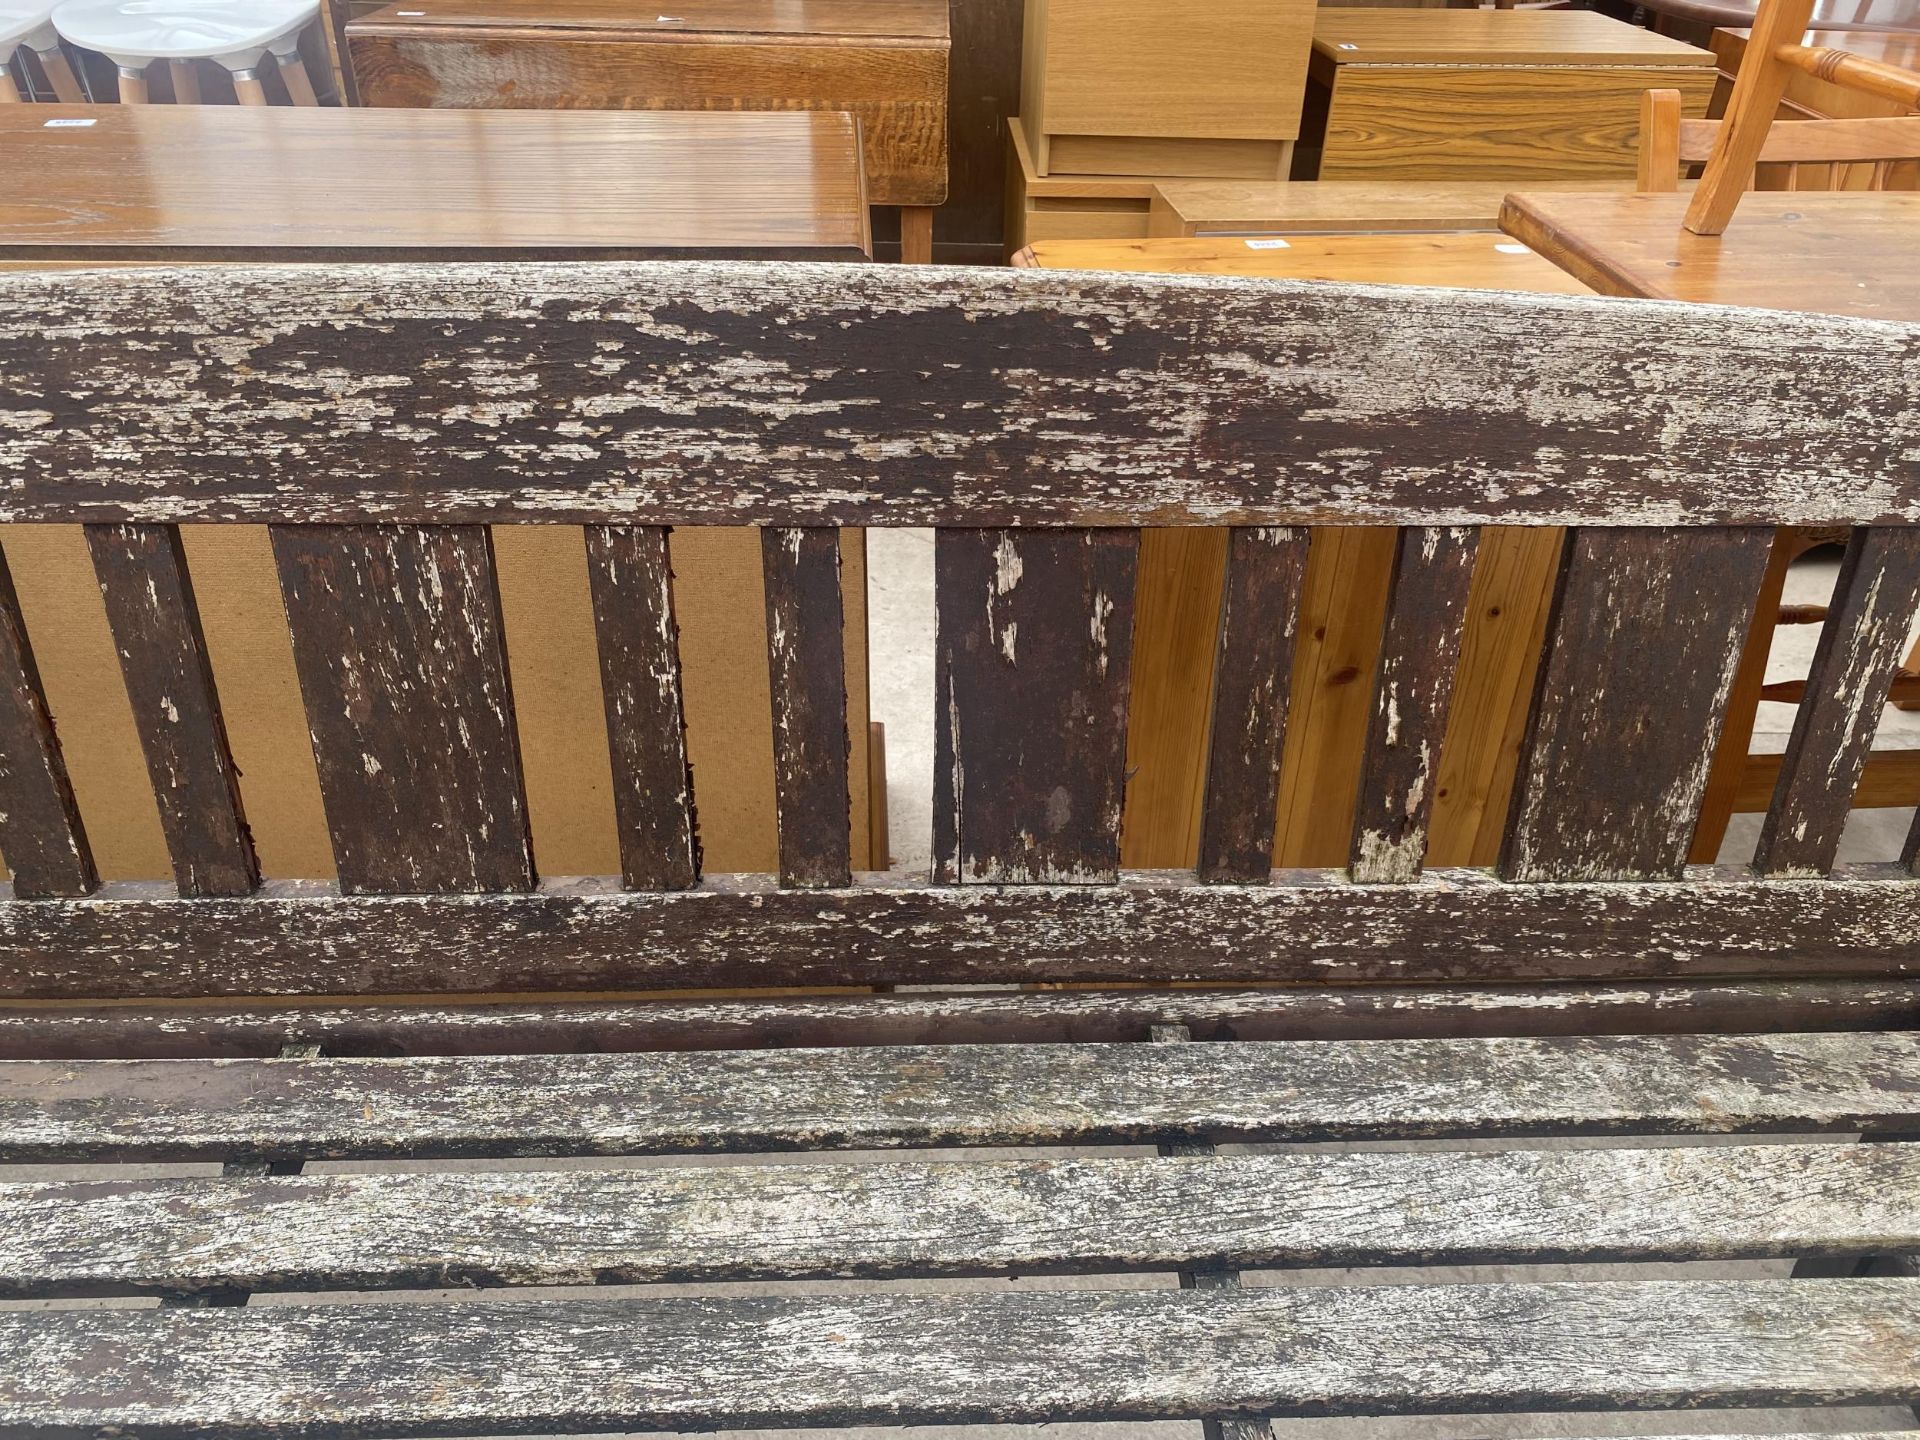 A LARGE WOODEN SLATTED GARDEN BENCH - Image 2 of 2